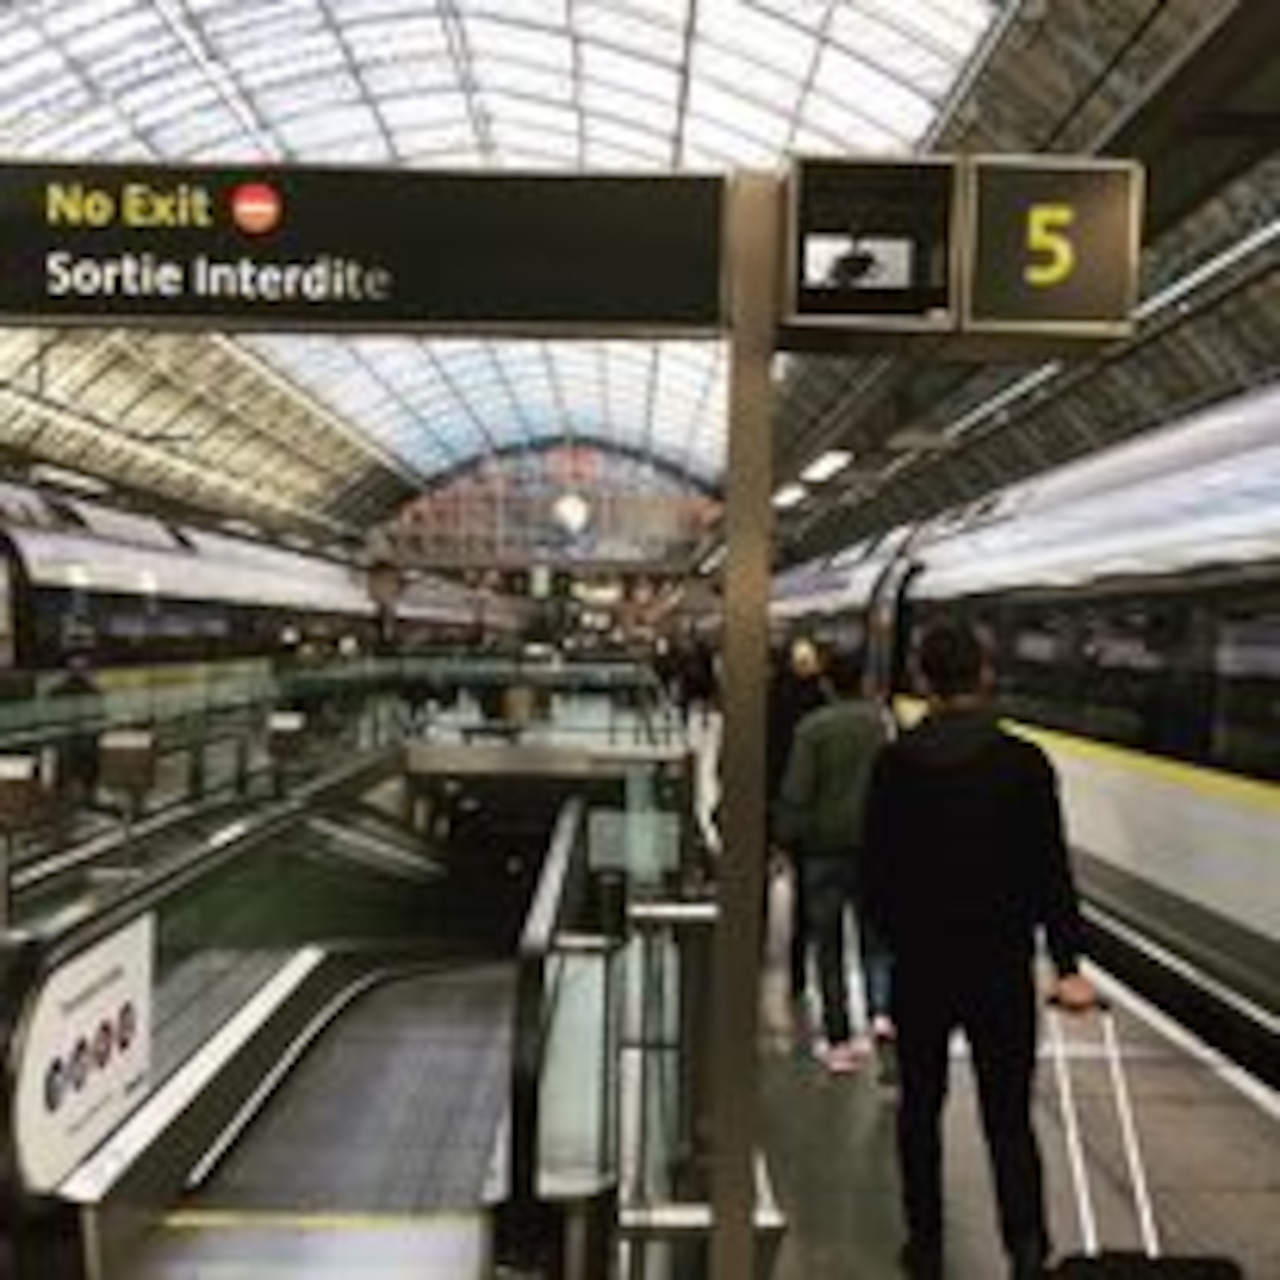 Malicious acts disrupt Frances high-speed train service ahead of Olympics ceremony [Video]